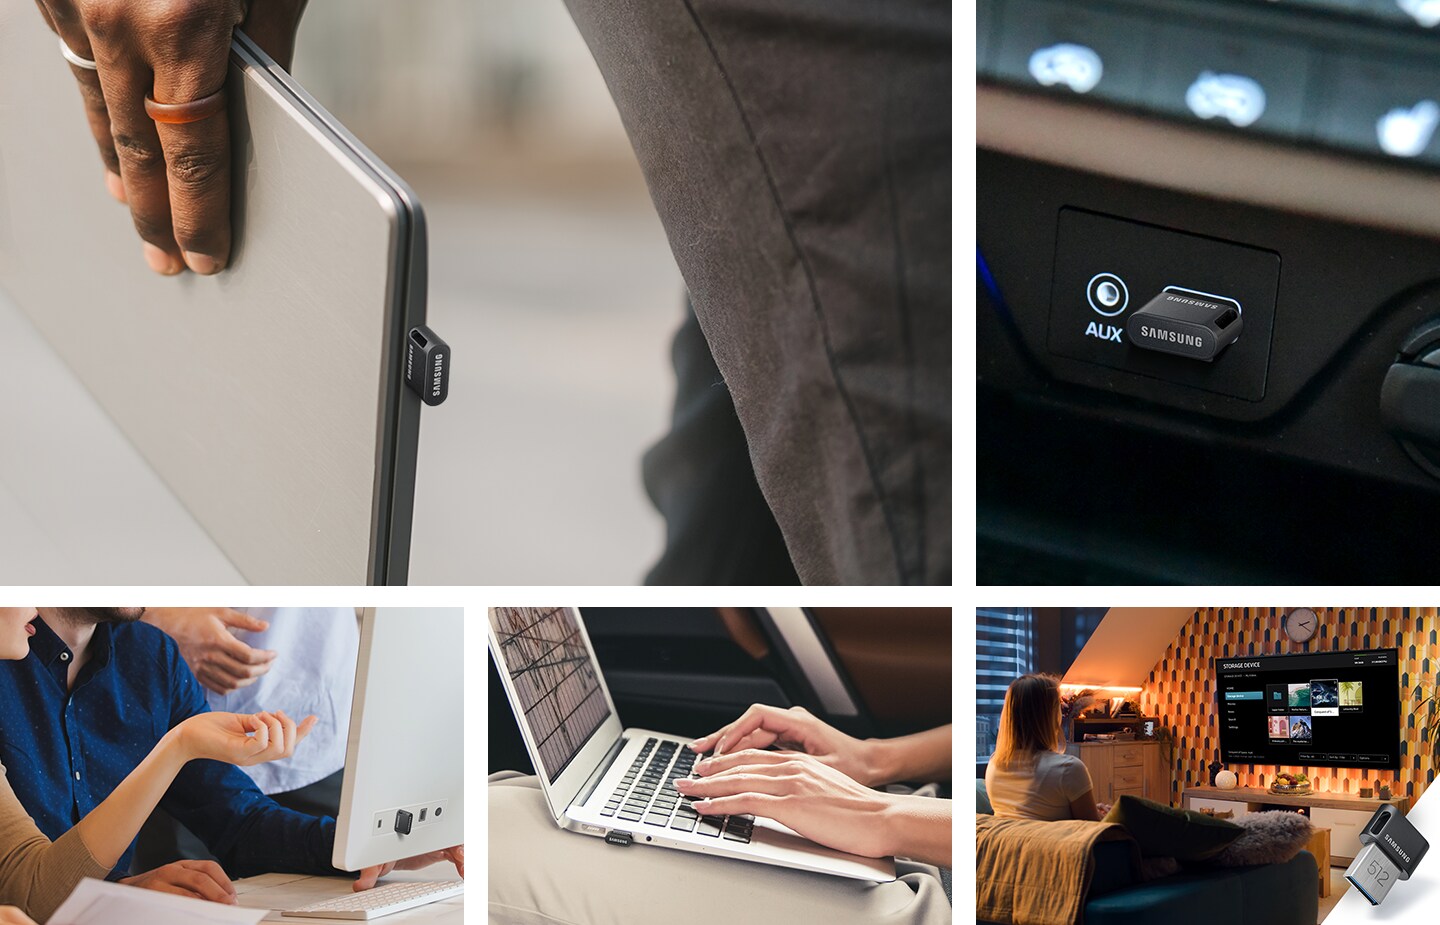 A collage of images showing Samsung Fit Plus being used in various devices, including laptop, a car audio system, and being used at home and in office settings.